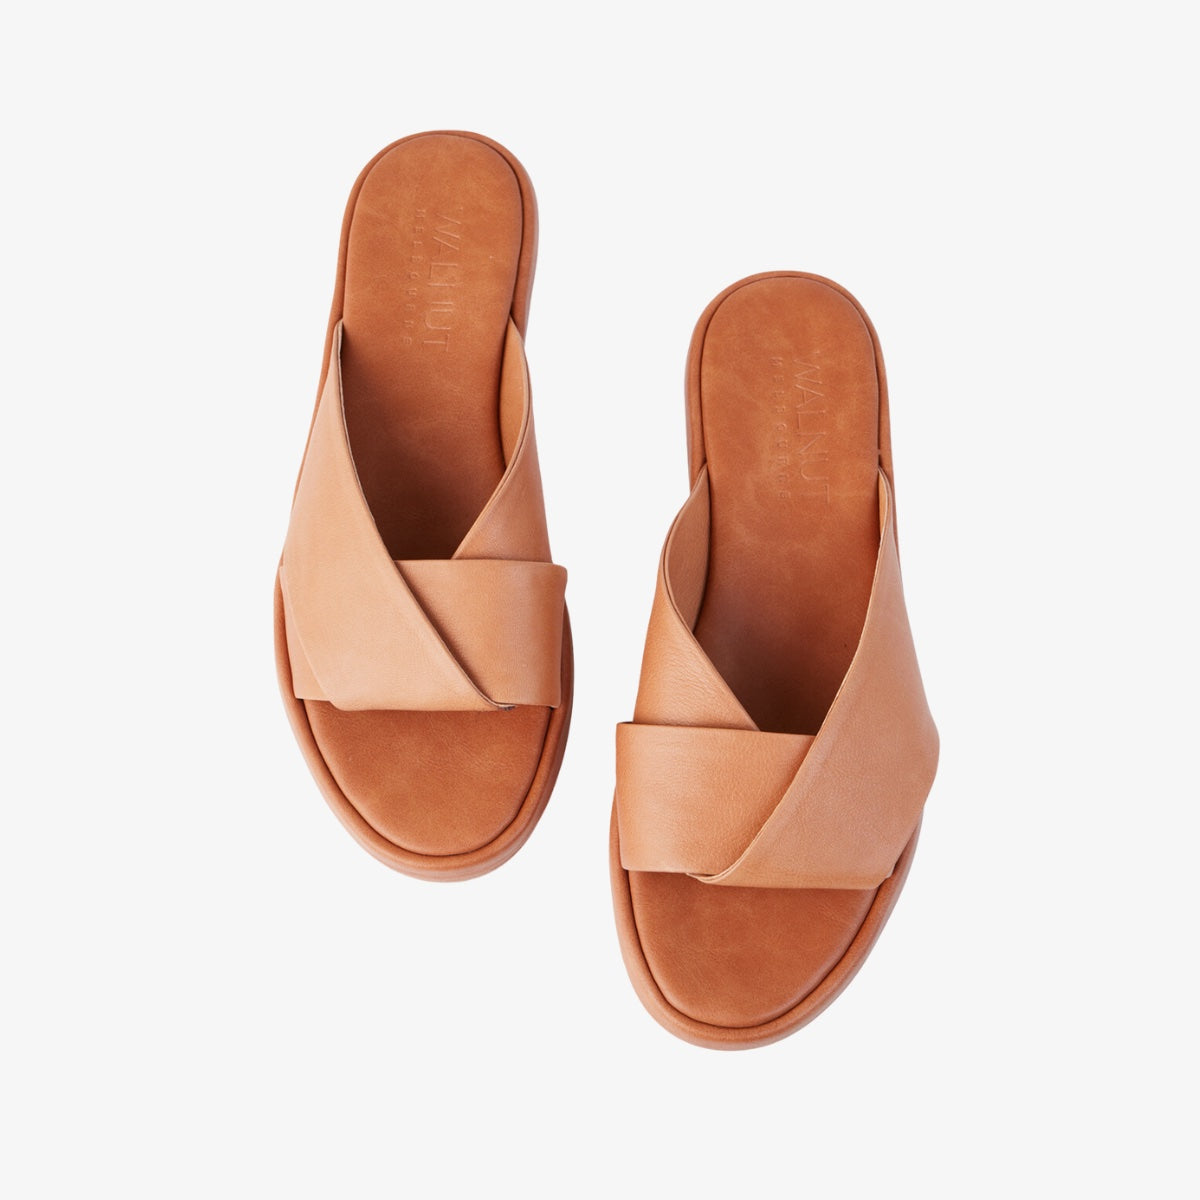 Women's Flats - leather shoes, slides and ballet flats – LUNAMAY